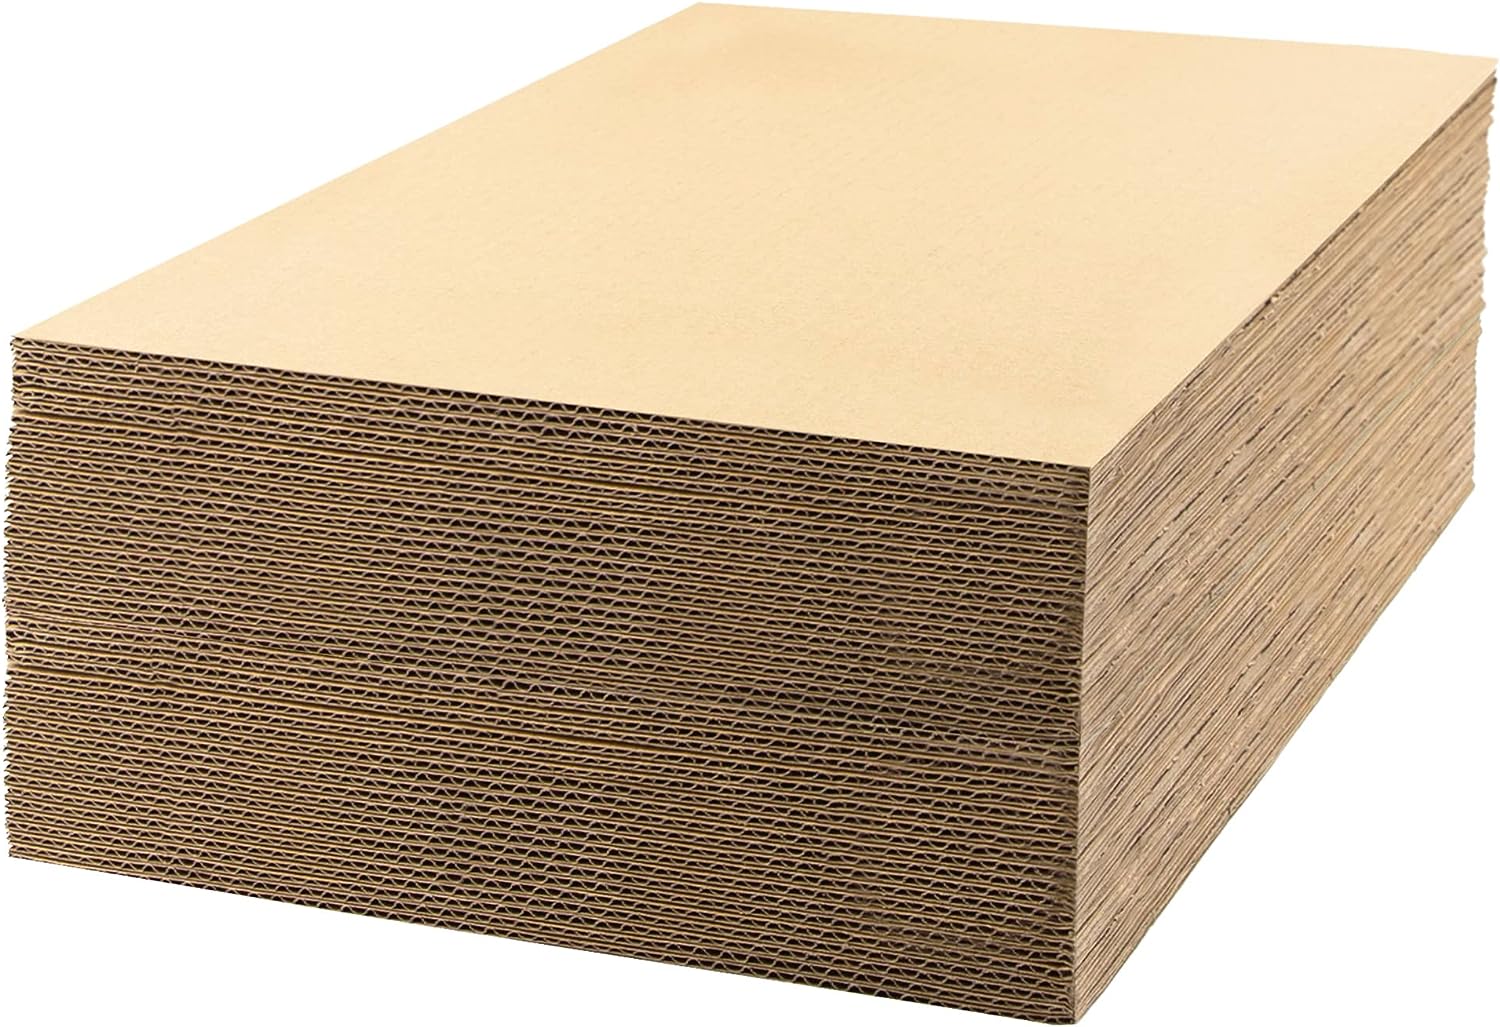  Mat Board Center, 50 Pack 11x14 Corrugated Cardboard Sheets,  1/16 inch thick, Flat Cardboard Inserts for Mailing, Packaging & Shipping,  Cardboard Backing, Craft Card Board (White on one side) : Office Products